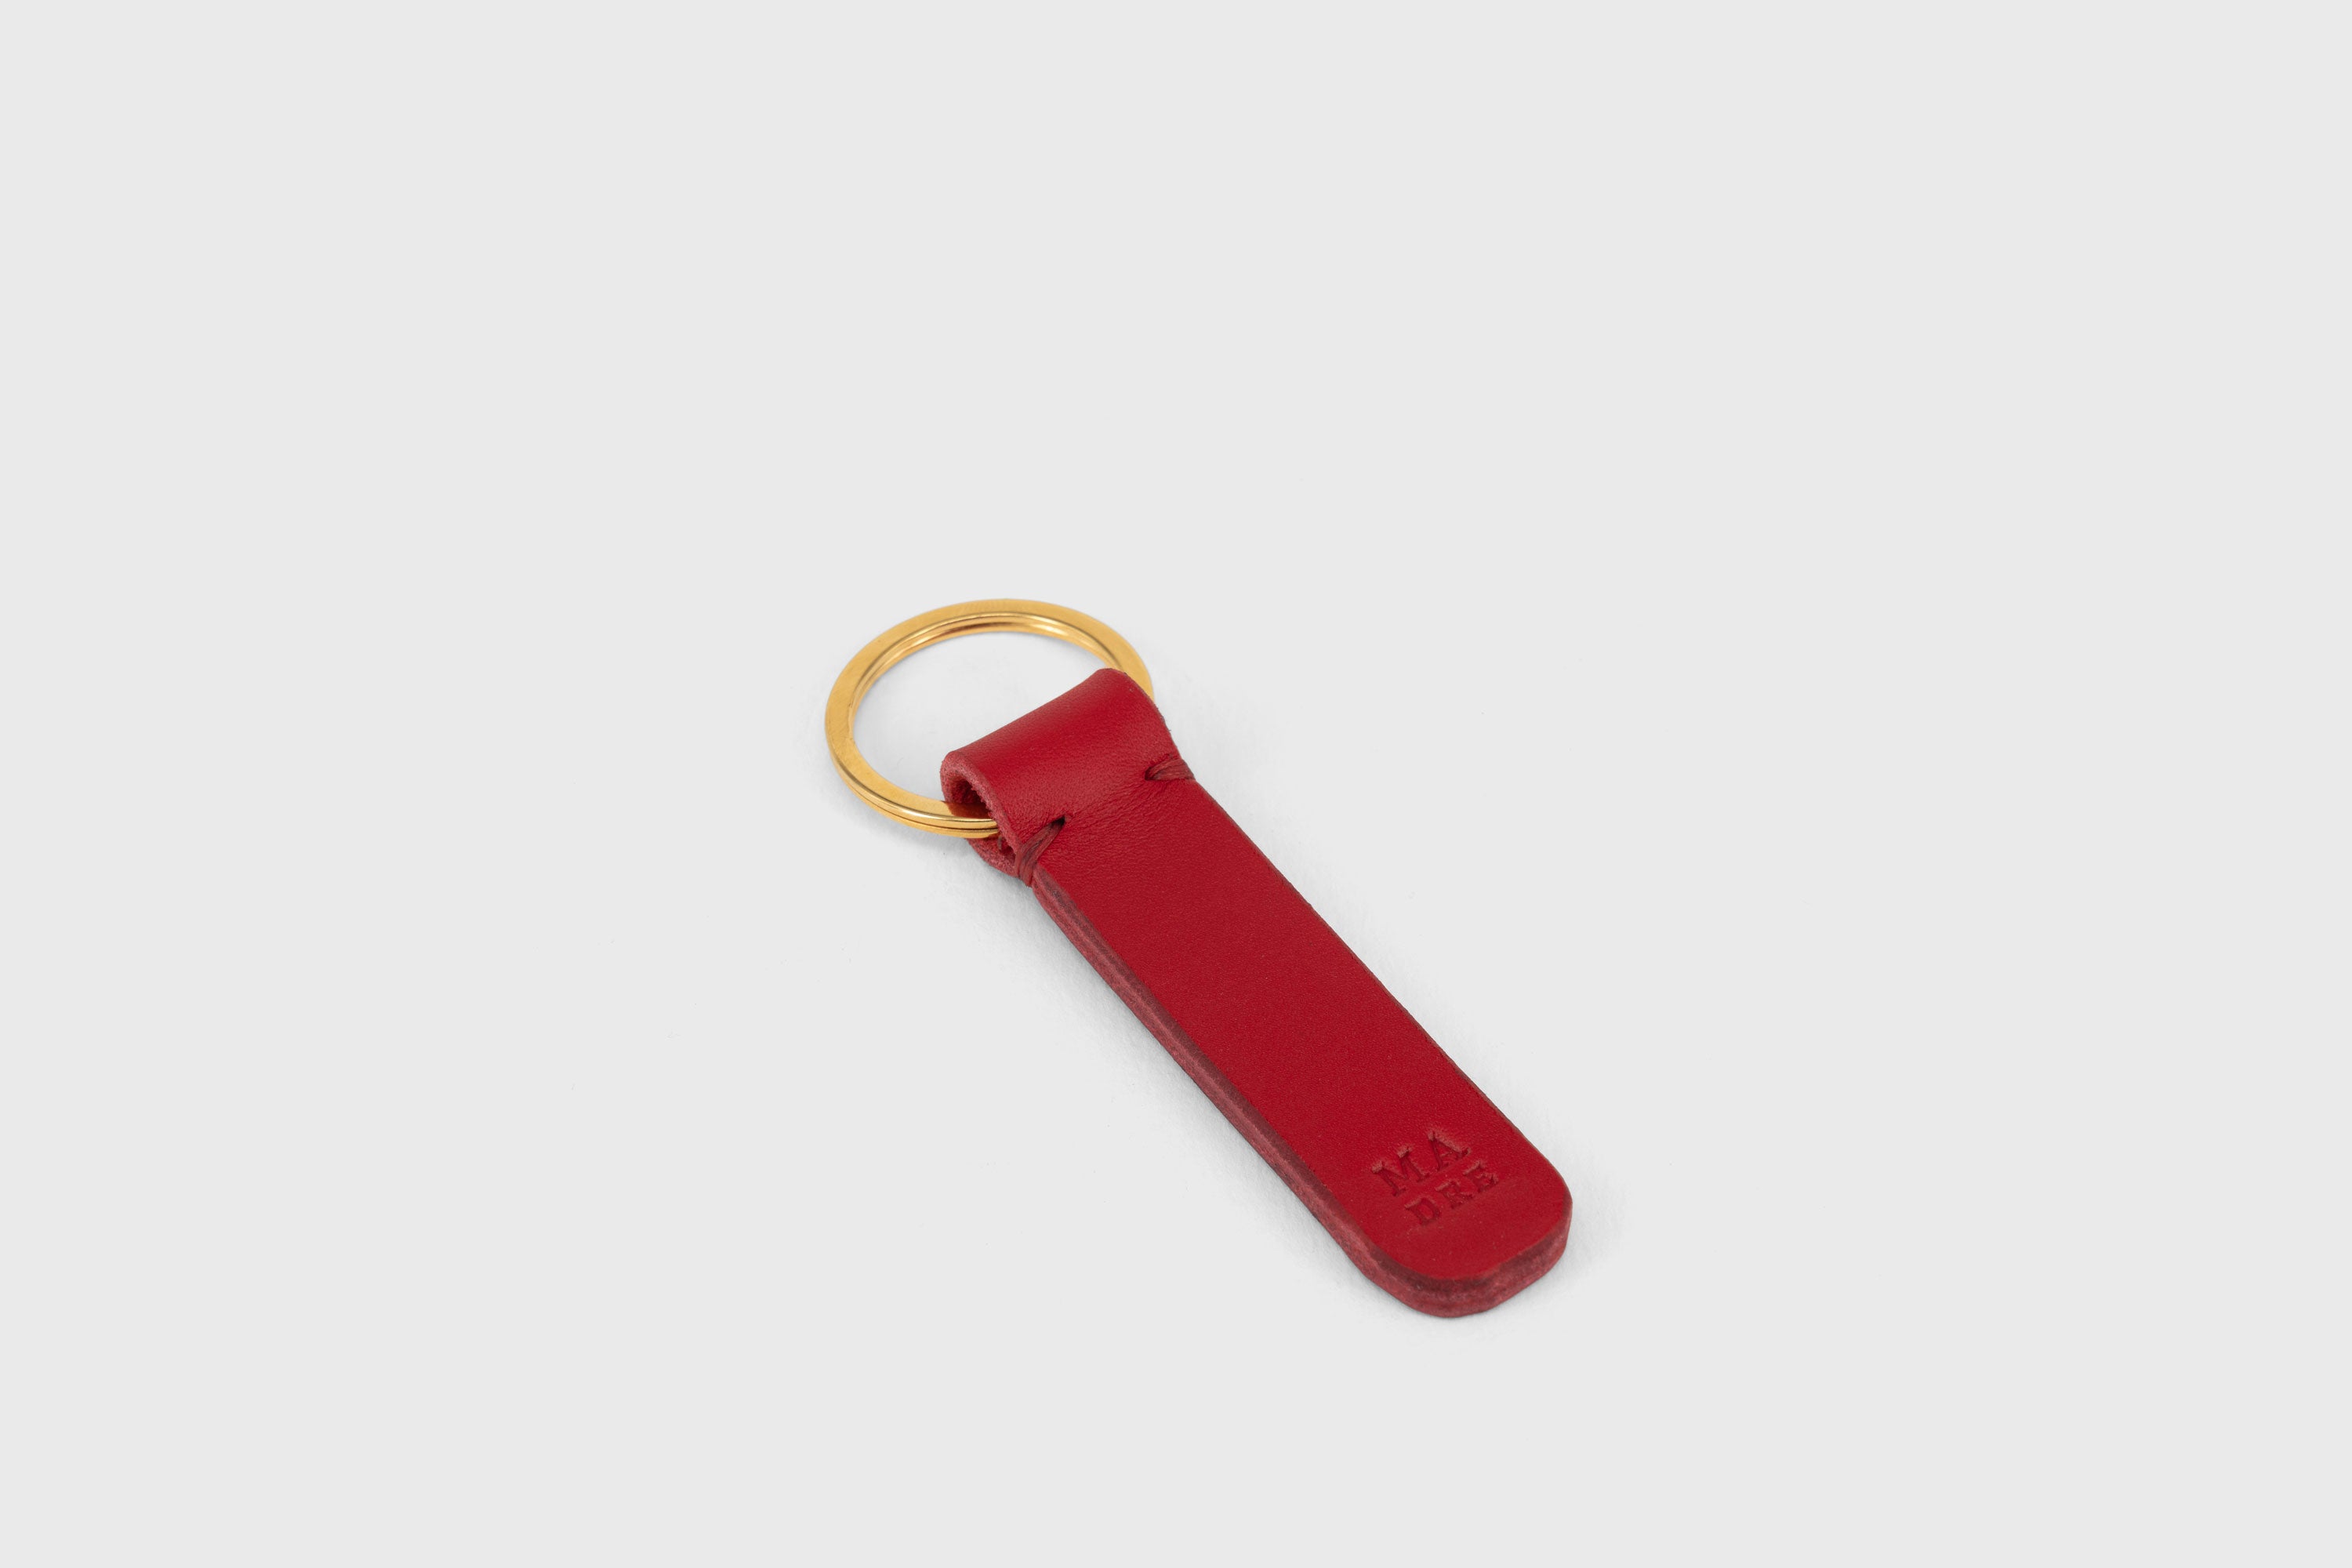 Key Ring Leather Red Color Fob Minimalist Designer Vegetable Tanned Full Grain Handcrafted Personalised Premium Quality Gold Atelier Madre Manuel Dreesmann Barcelona Spain